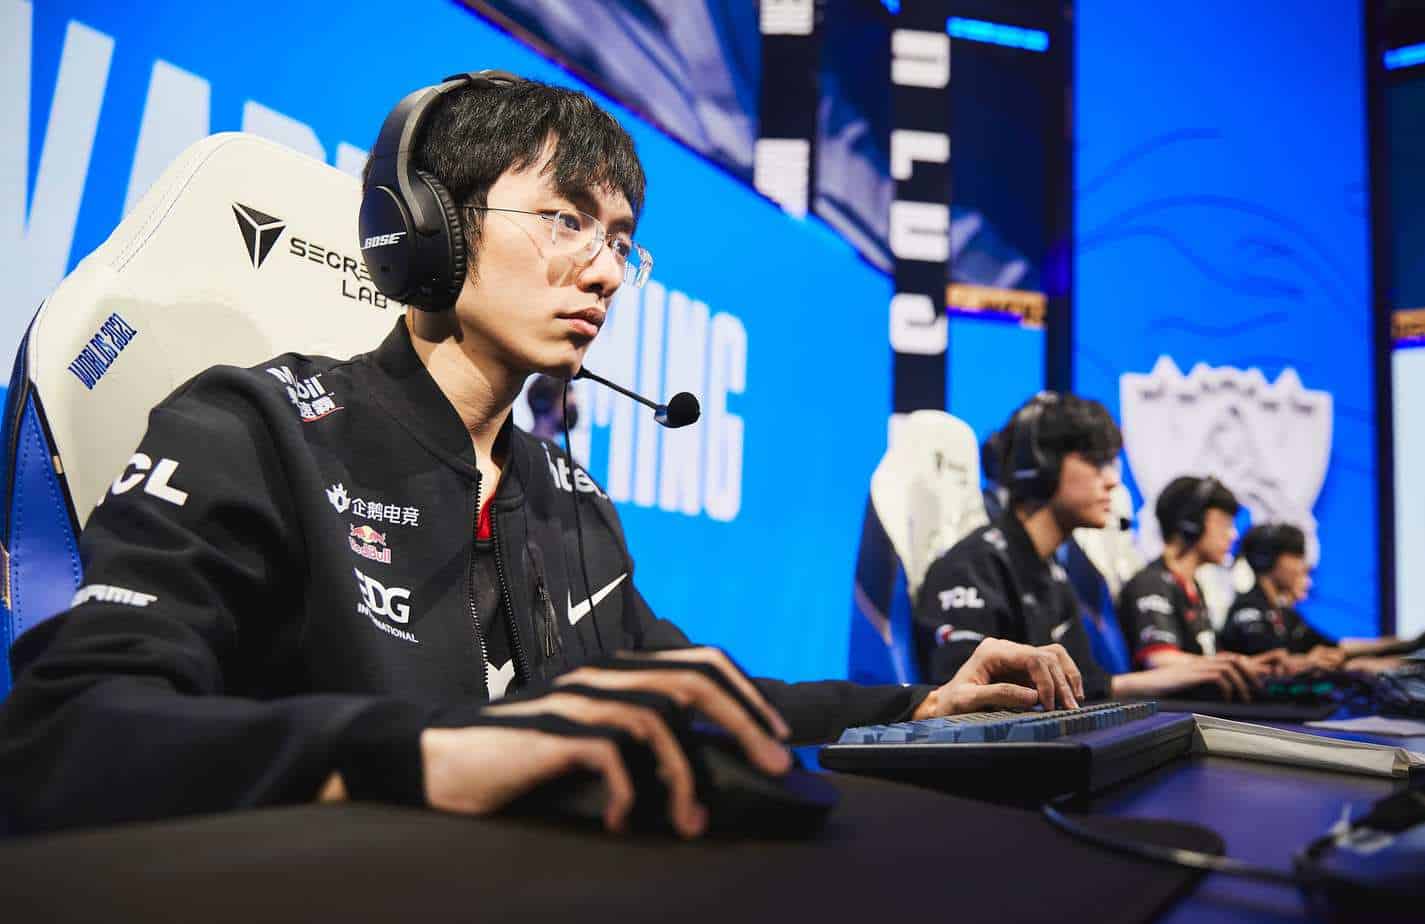 EDward Gaming vs. Invictus Gaming – Betting Odds and Preview